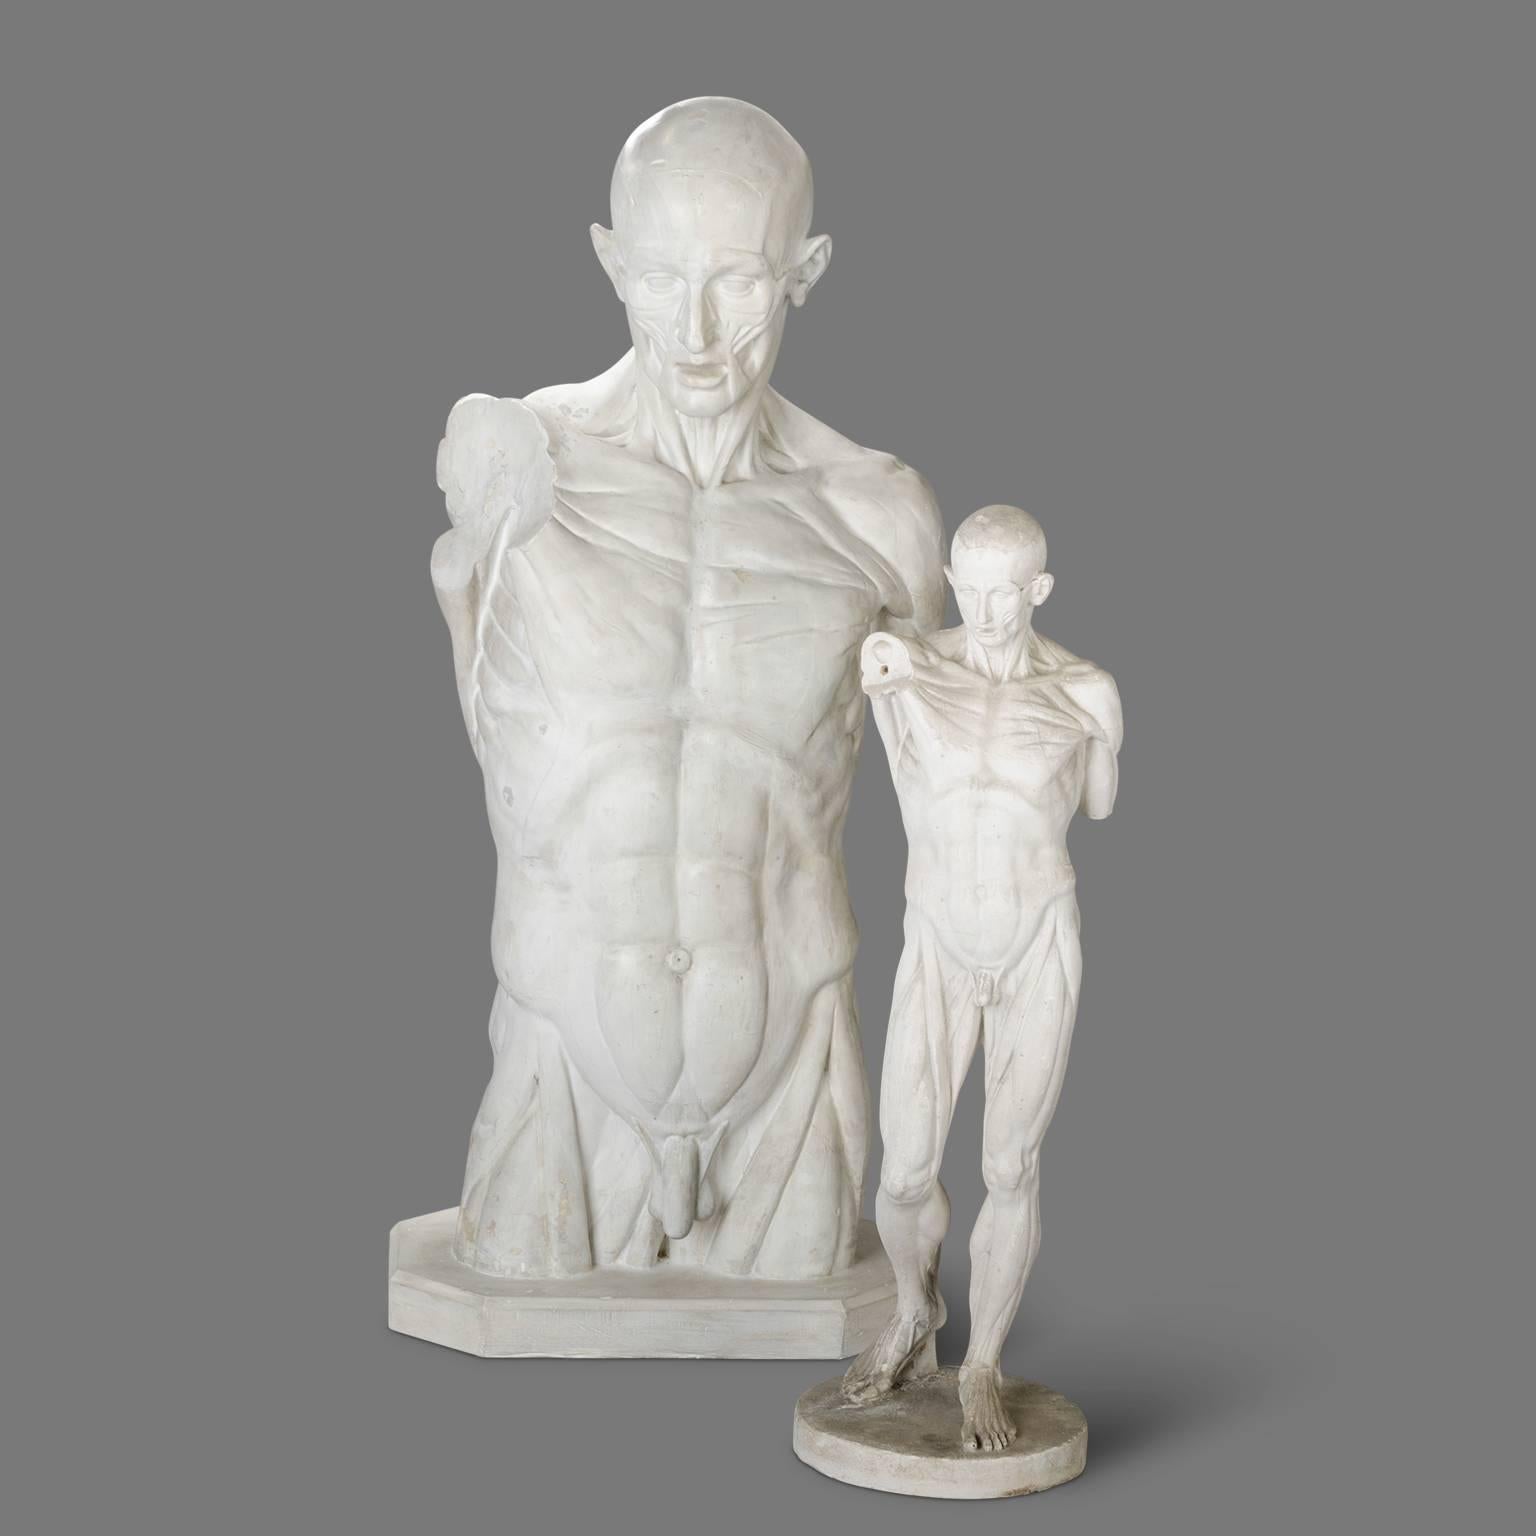 These models were used in conventional drawing anatomy class schools and academies of fine arts at the beginning of the century. They can be therefore found in different sizes and models.

The two proposed skinned models, although partially